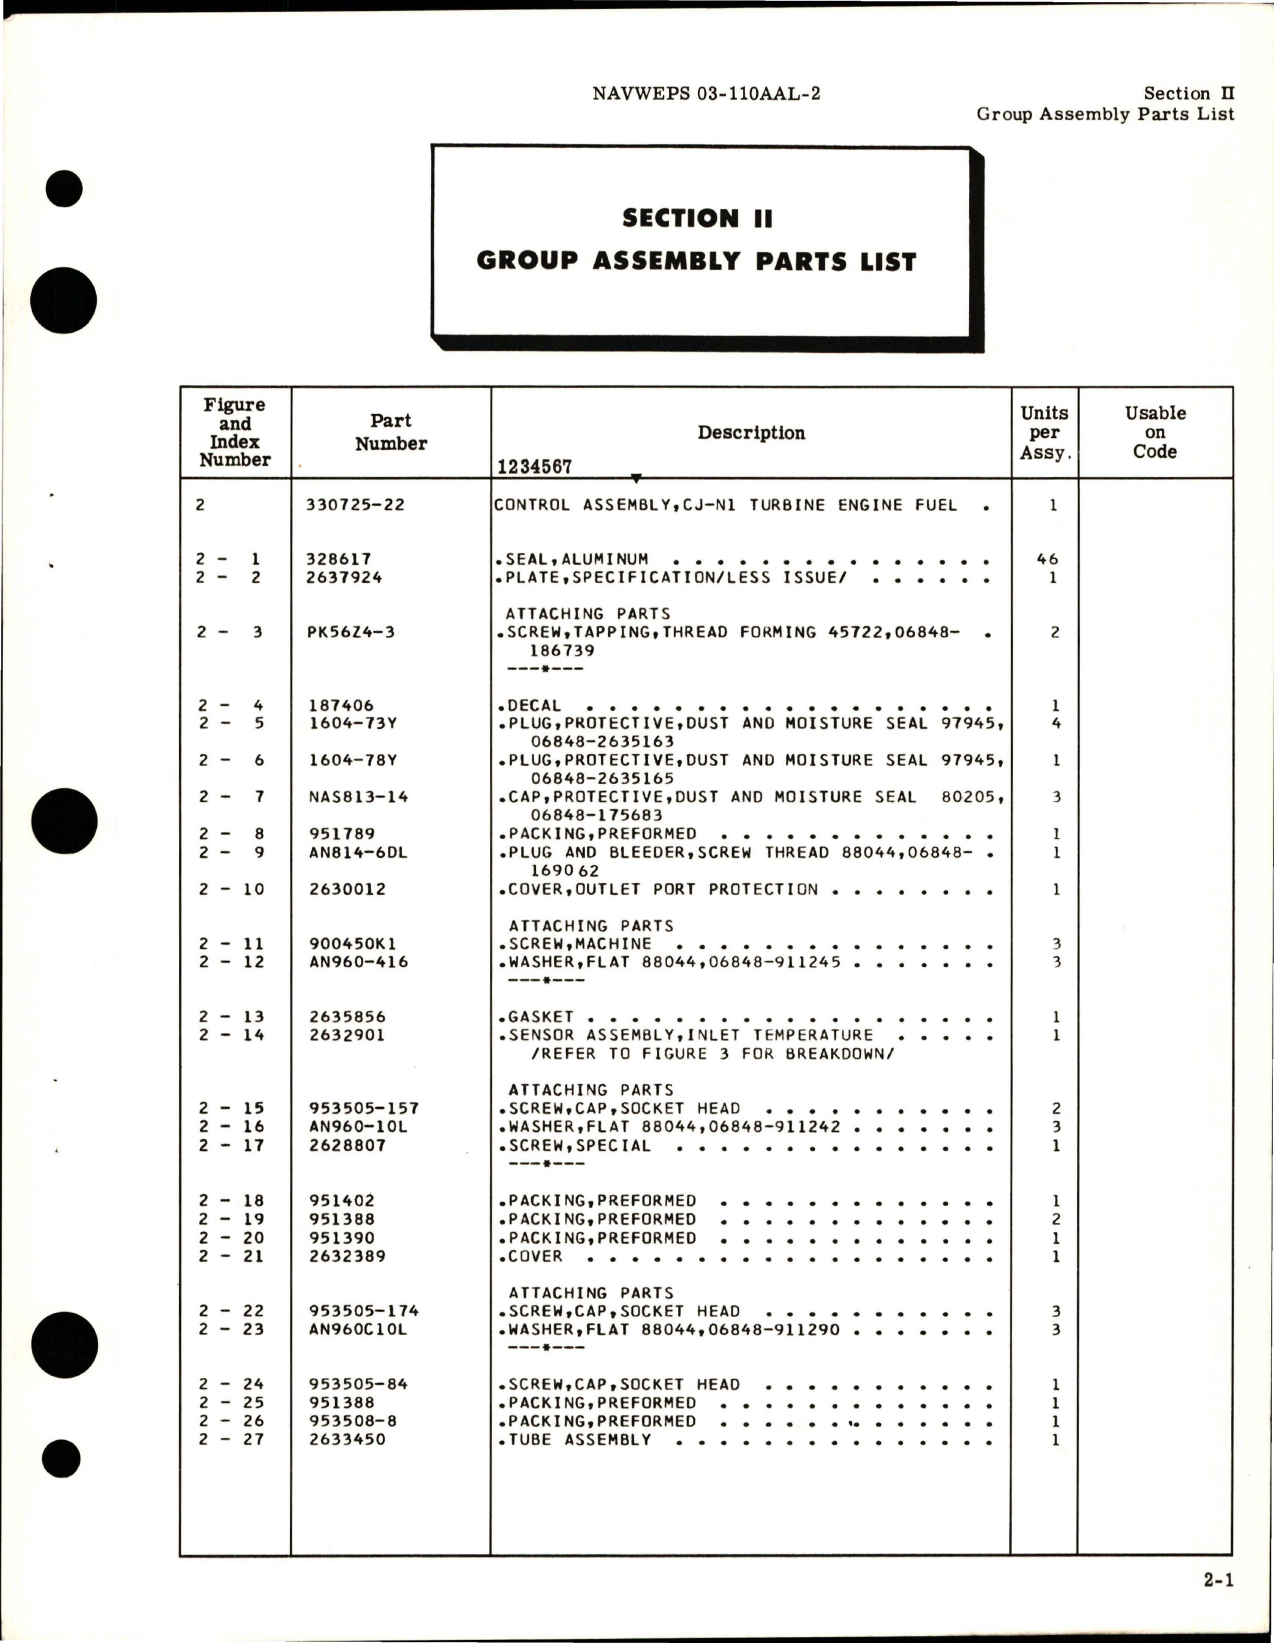 Sample page 9 from AirCorps Library document: Illustrated Parts Breakdown for Turbine Engine Main Fuel Control - Model CJ-N1 - Parts List 330725-22